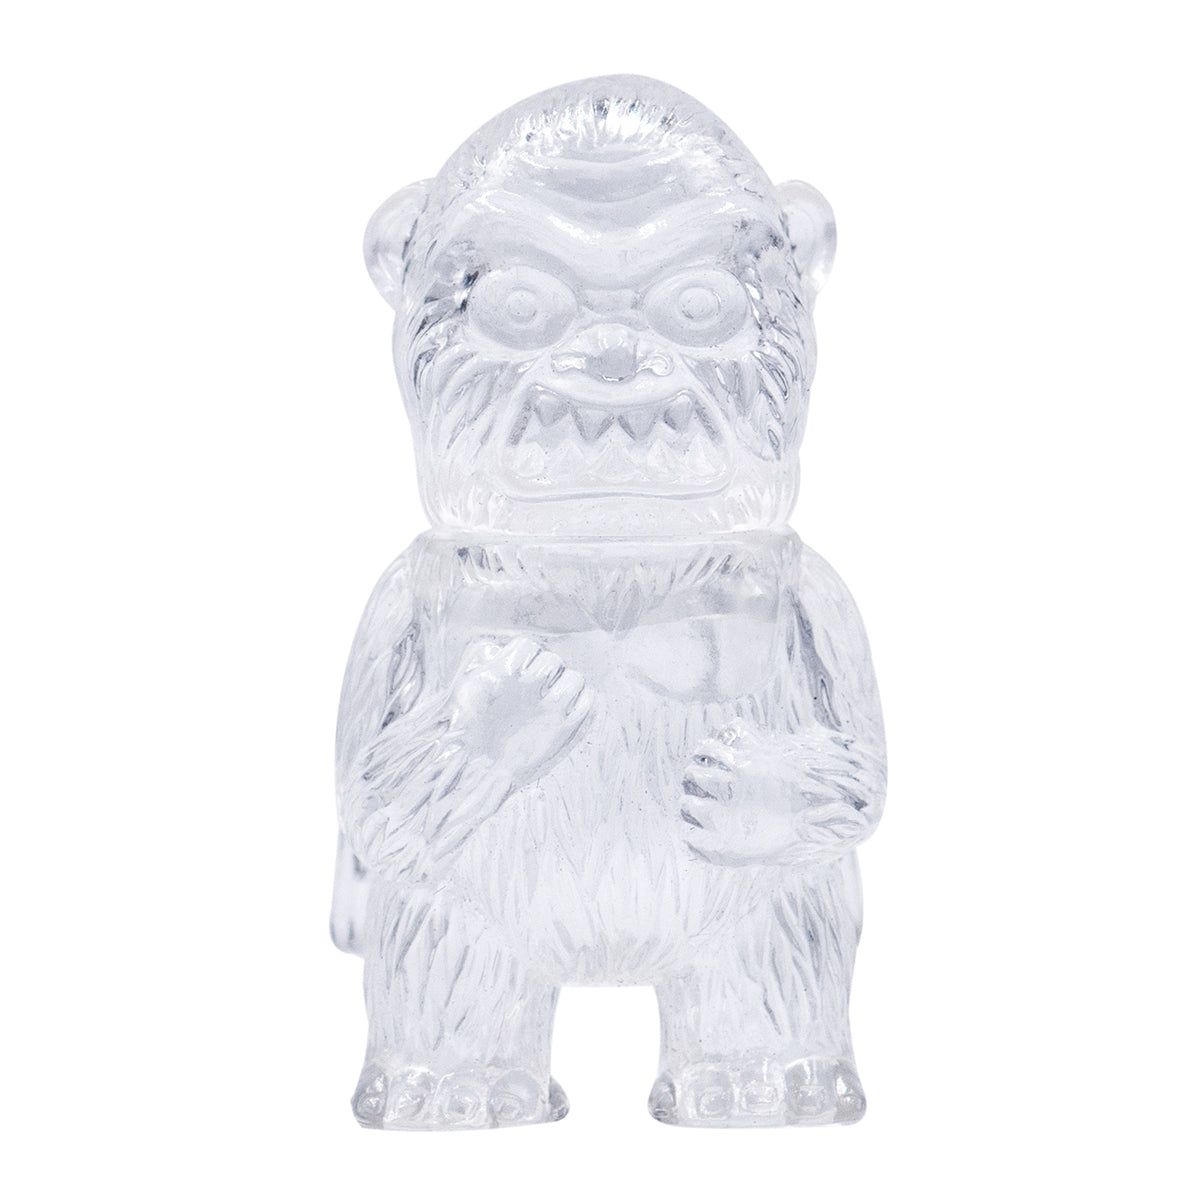 Super7 Micro Vinyl - Wing Kong (Clear)